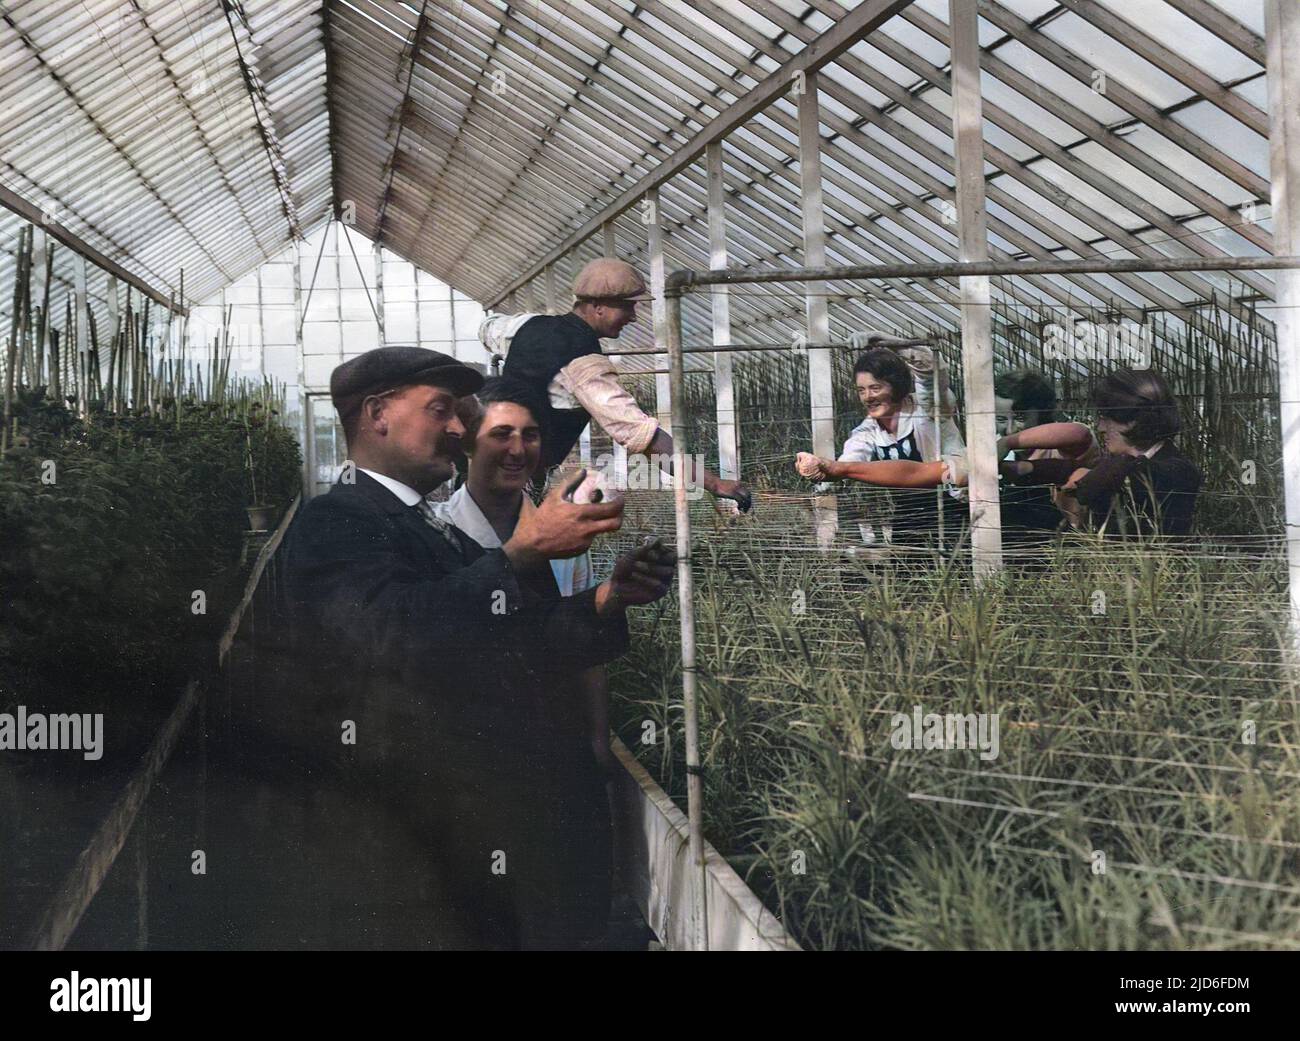 Students learning how to harvest properly in a greenhouse at Swanley Agricultural College, Swanley, Kent, England. Colourised version of : 10164559       Date: early 1930s Stock Photo